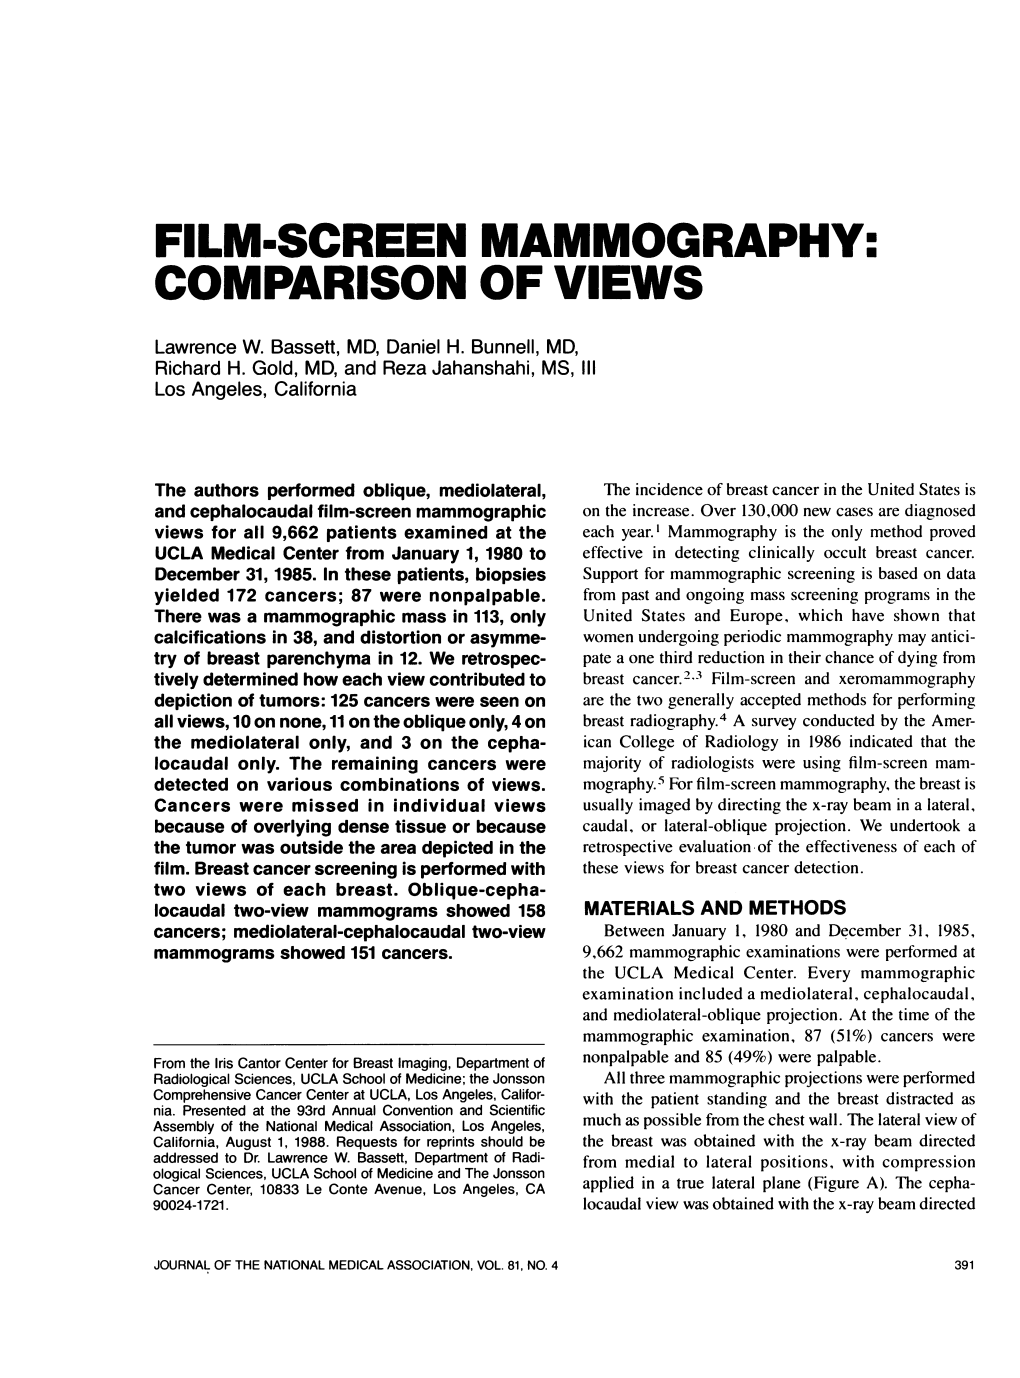 Film-Screen Mammography: Comparison of Views